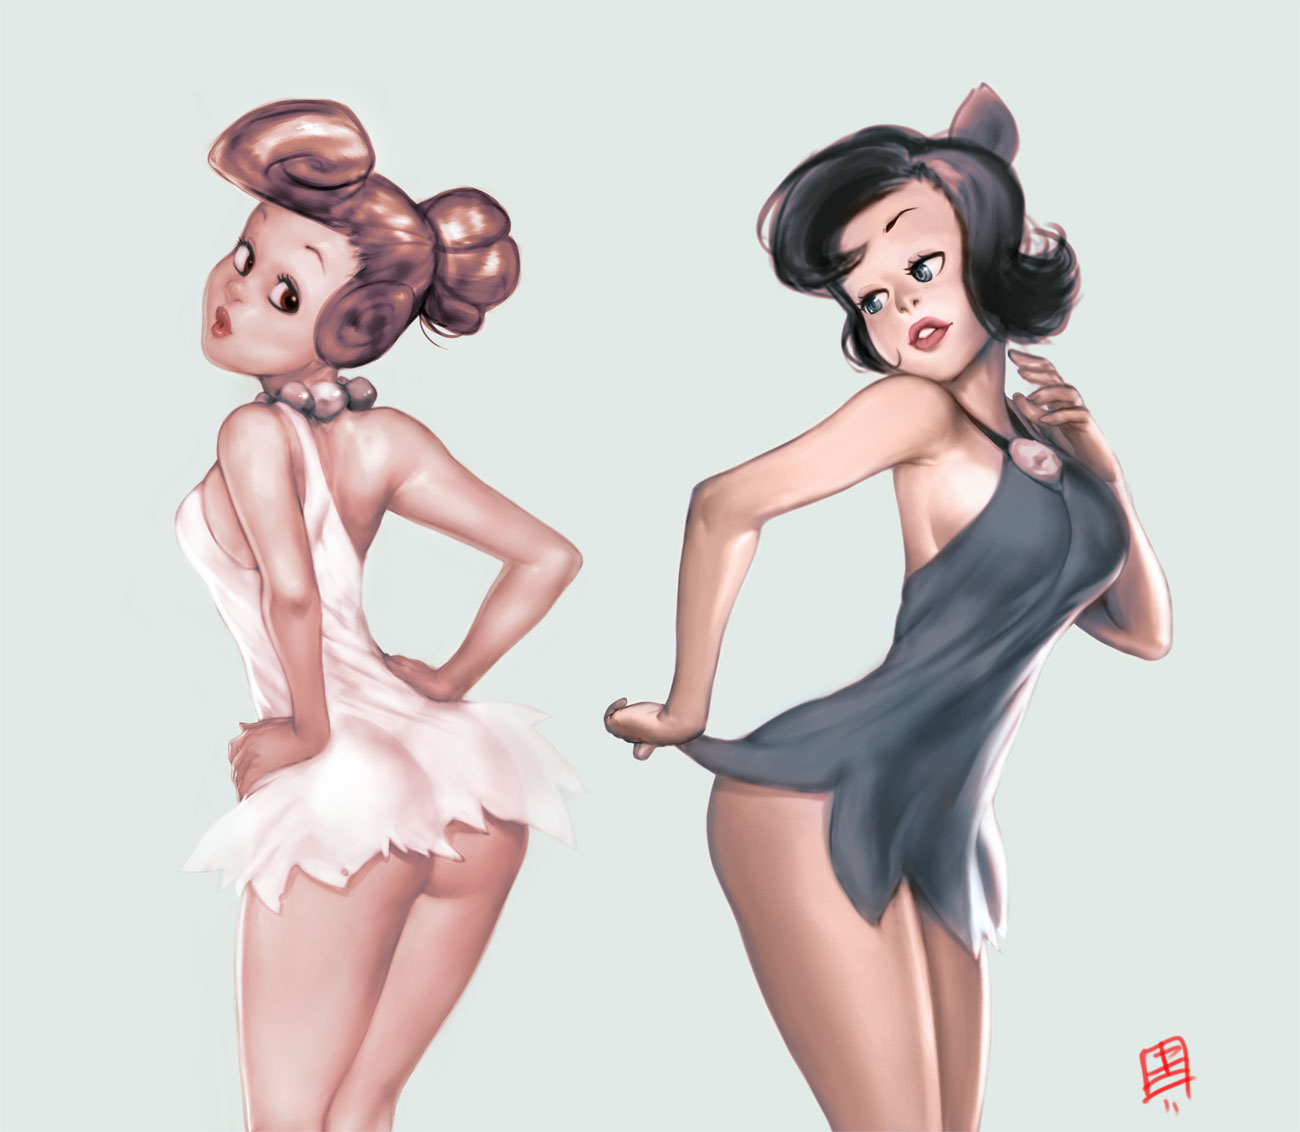 sexy wilma flintstone and betty rubble by qiqo.